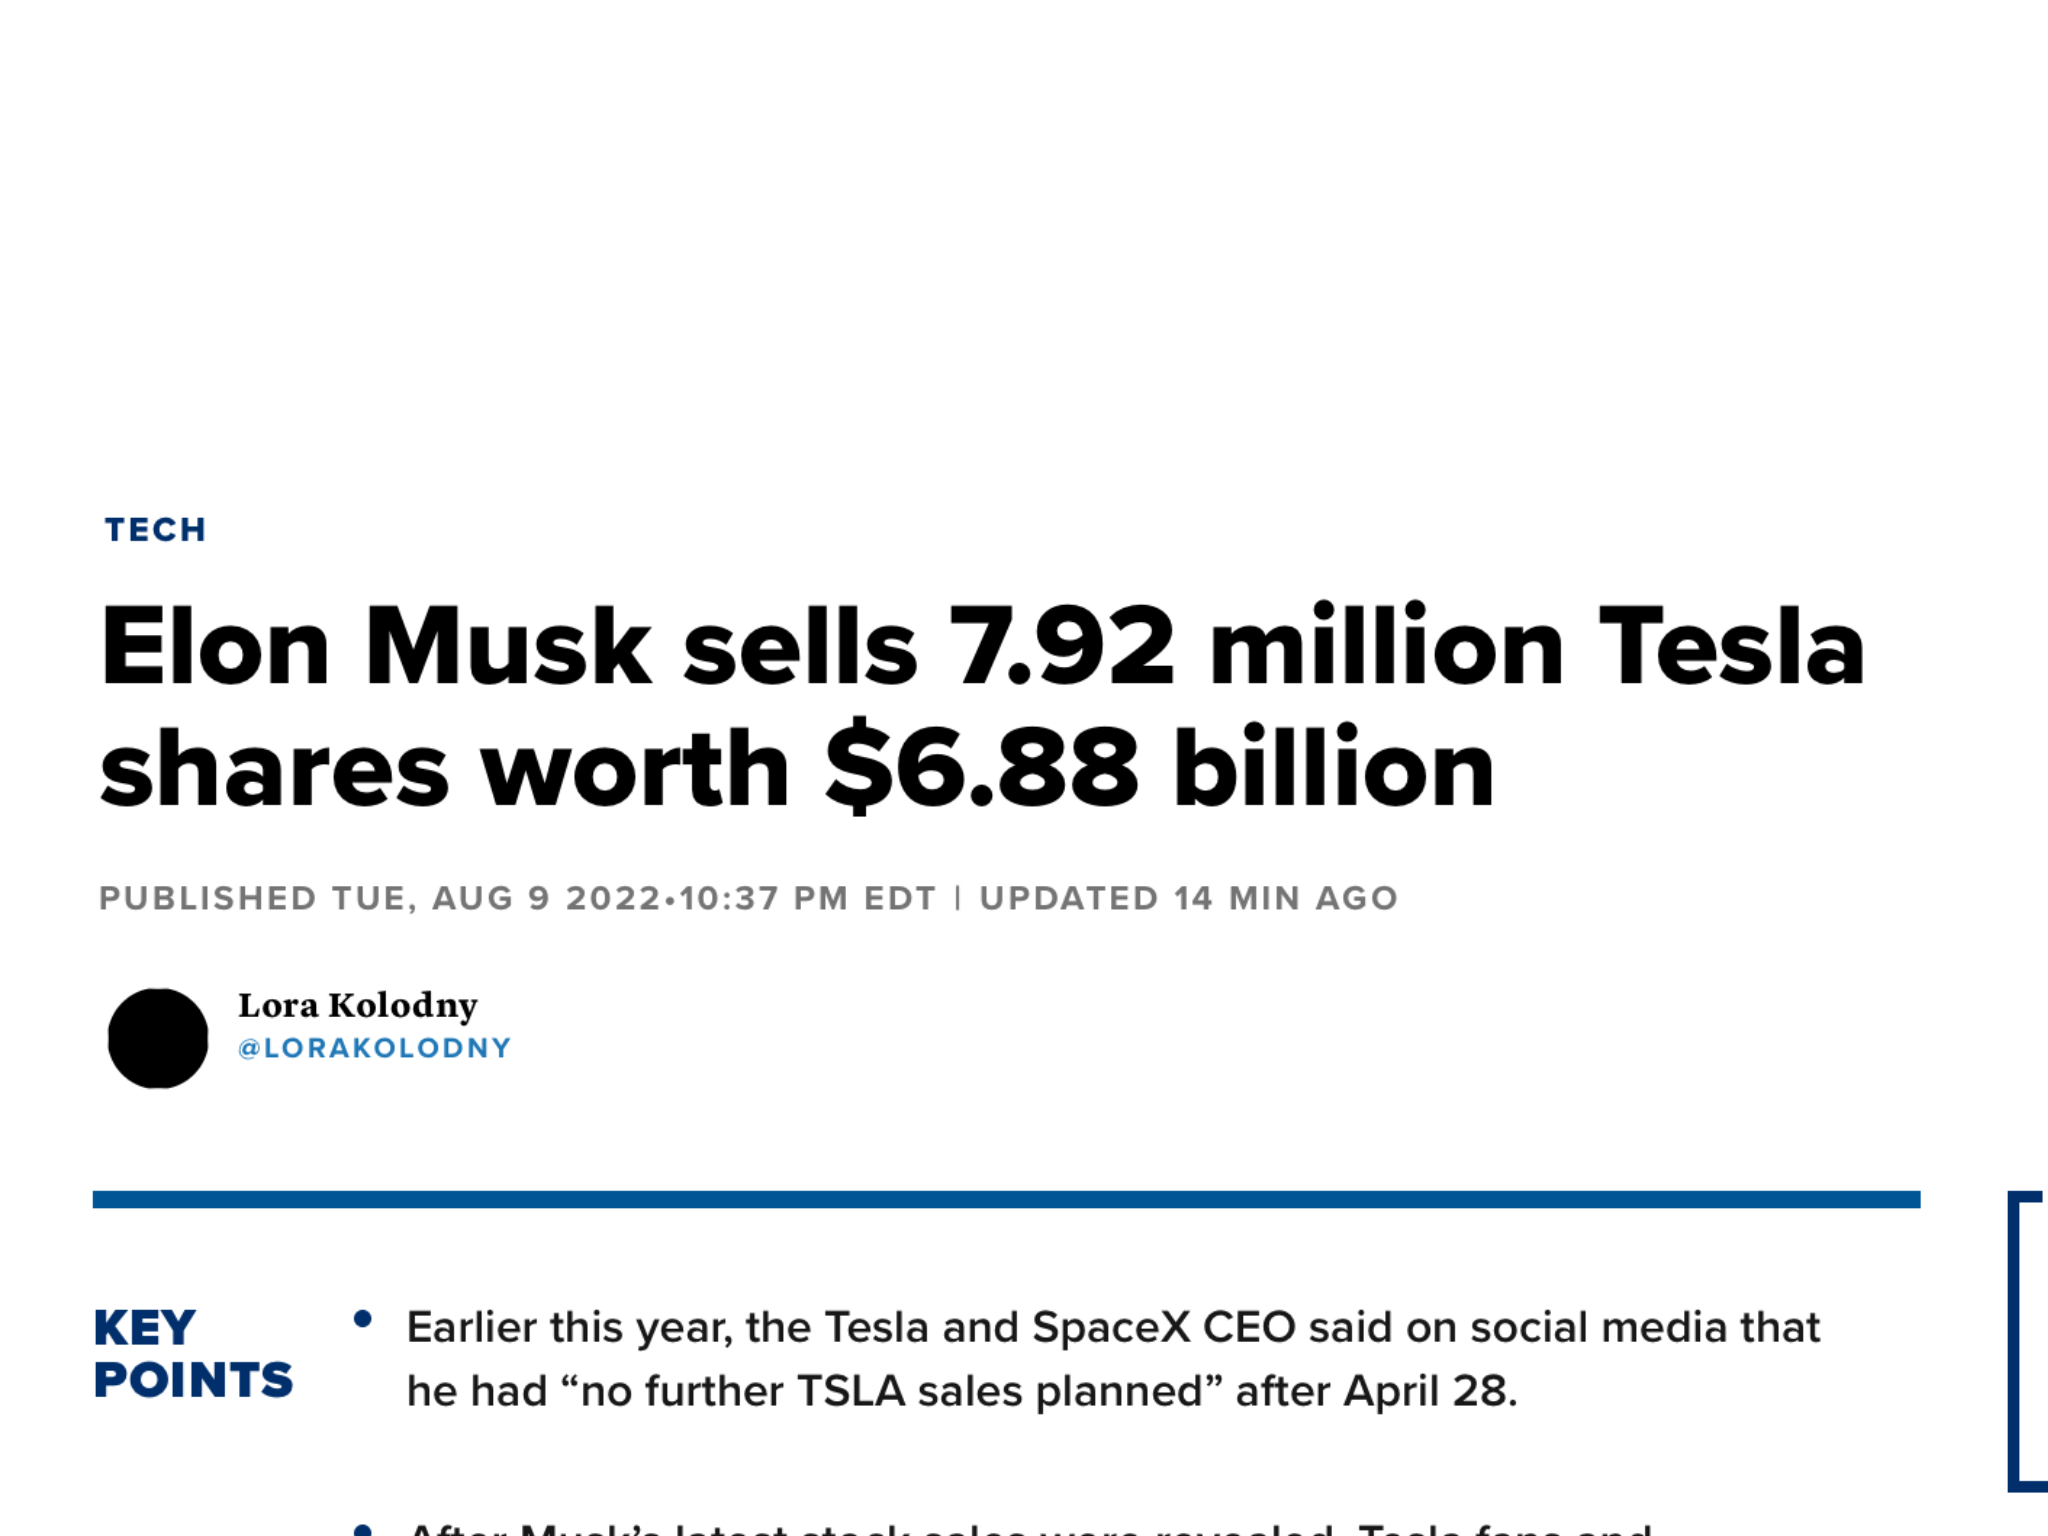 ELON SHOULD SELL IT ALL NOW B4 THE GLOBAL COLLAPSE